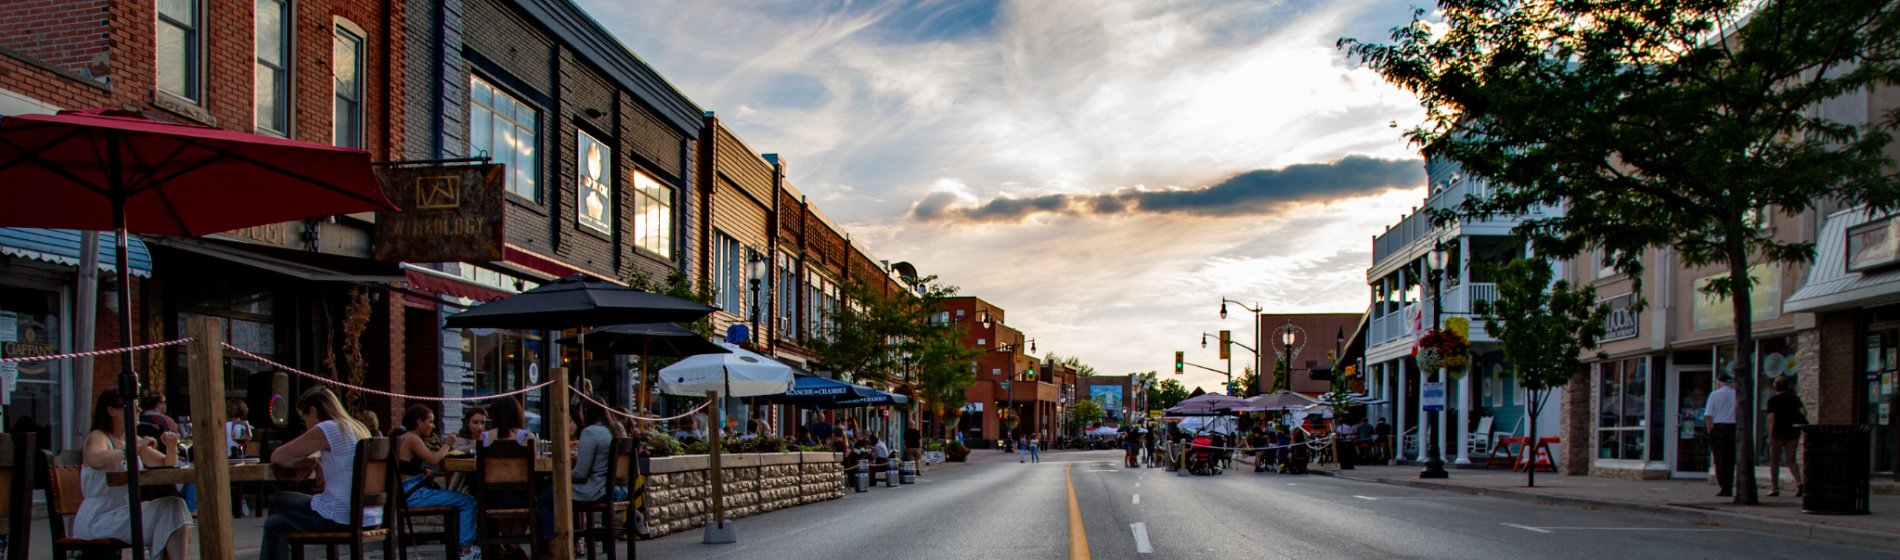 Downtown Kingsville Ontario during Open Streets event